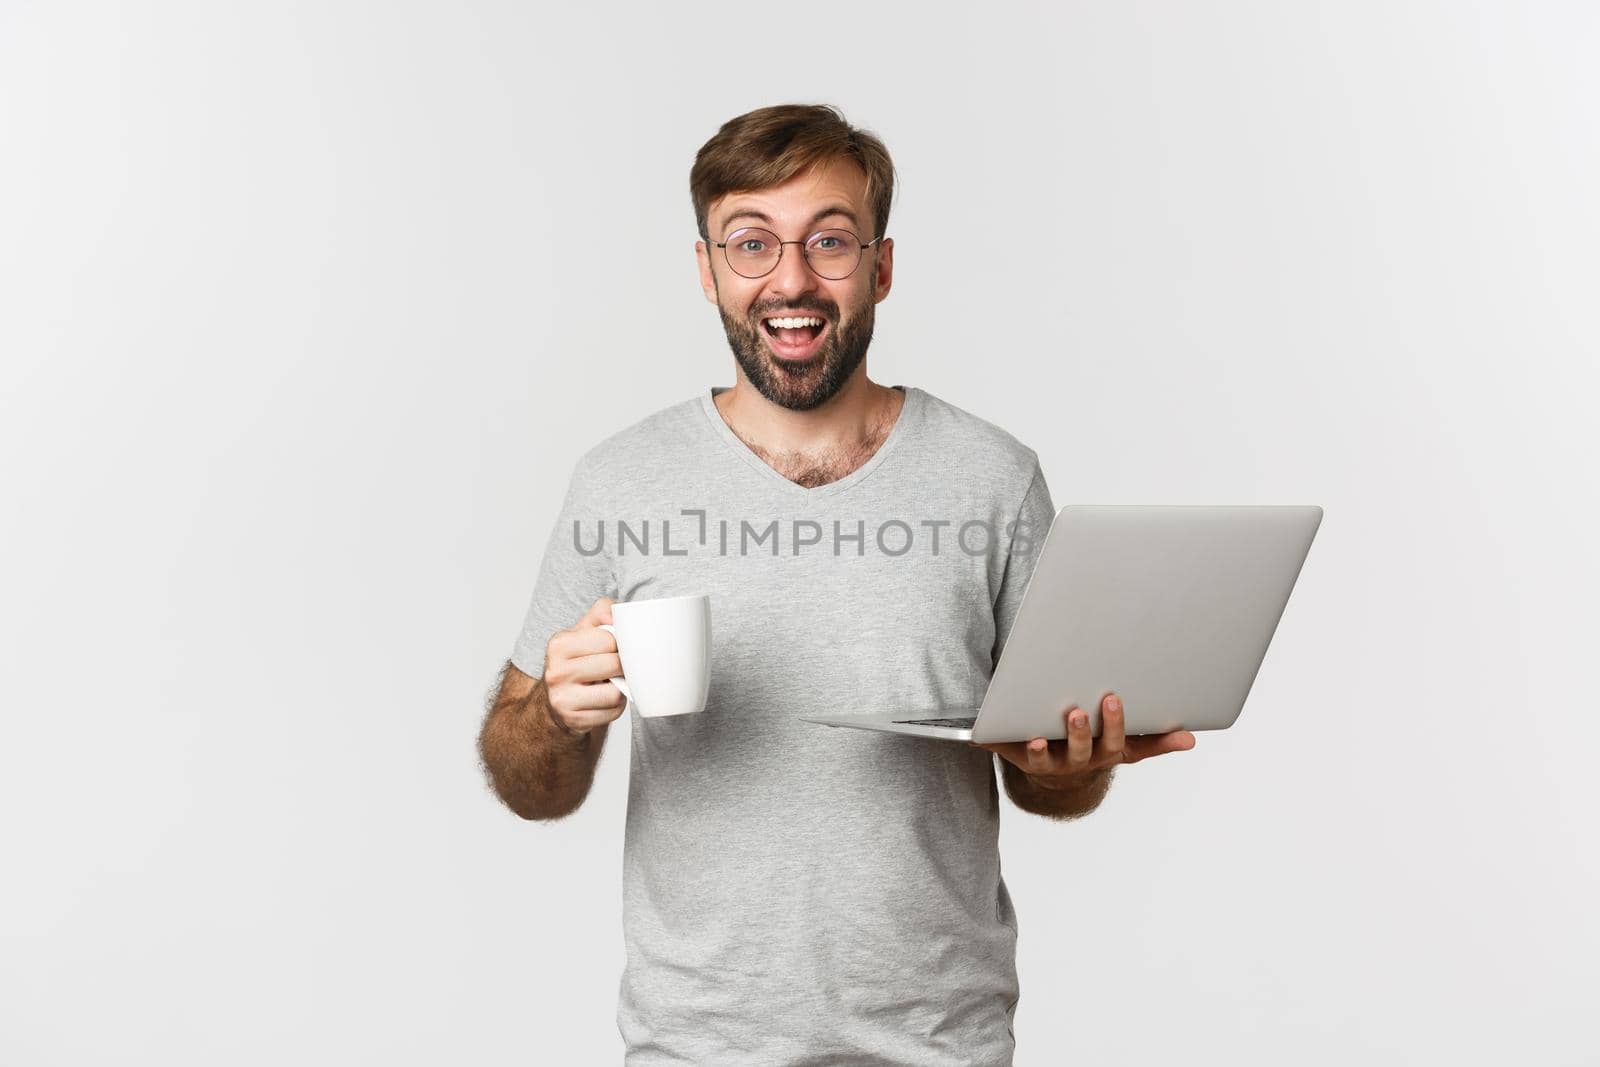 Young happy man working with laptop, drinking coffee and smiling, standing over white background.